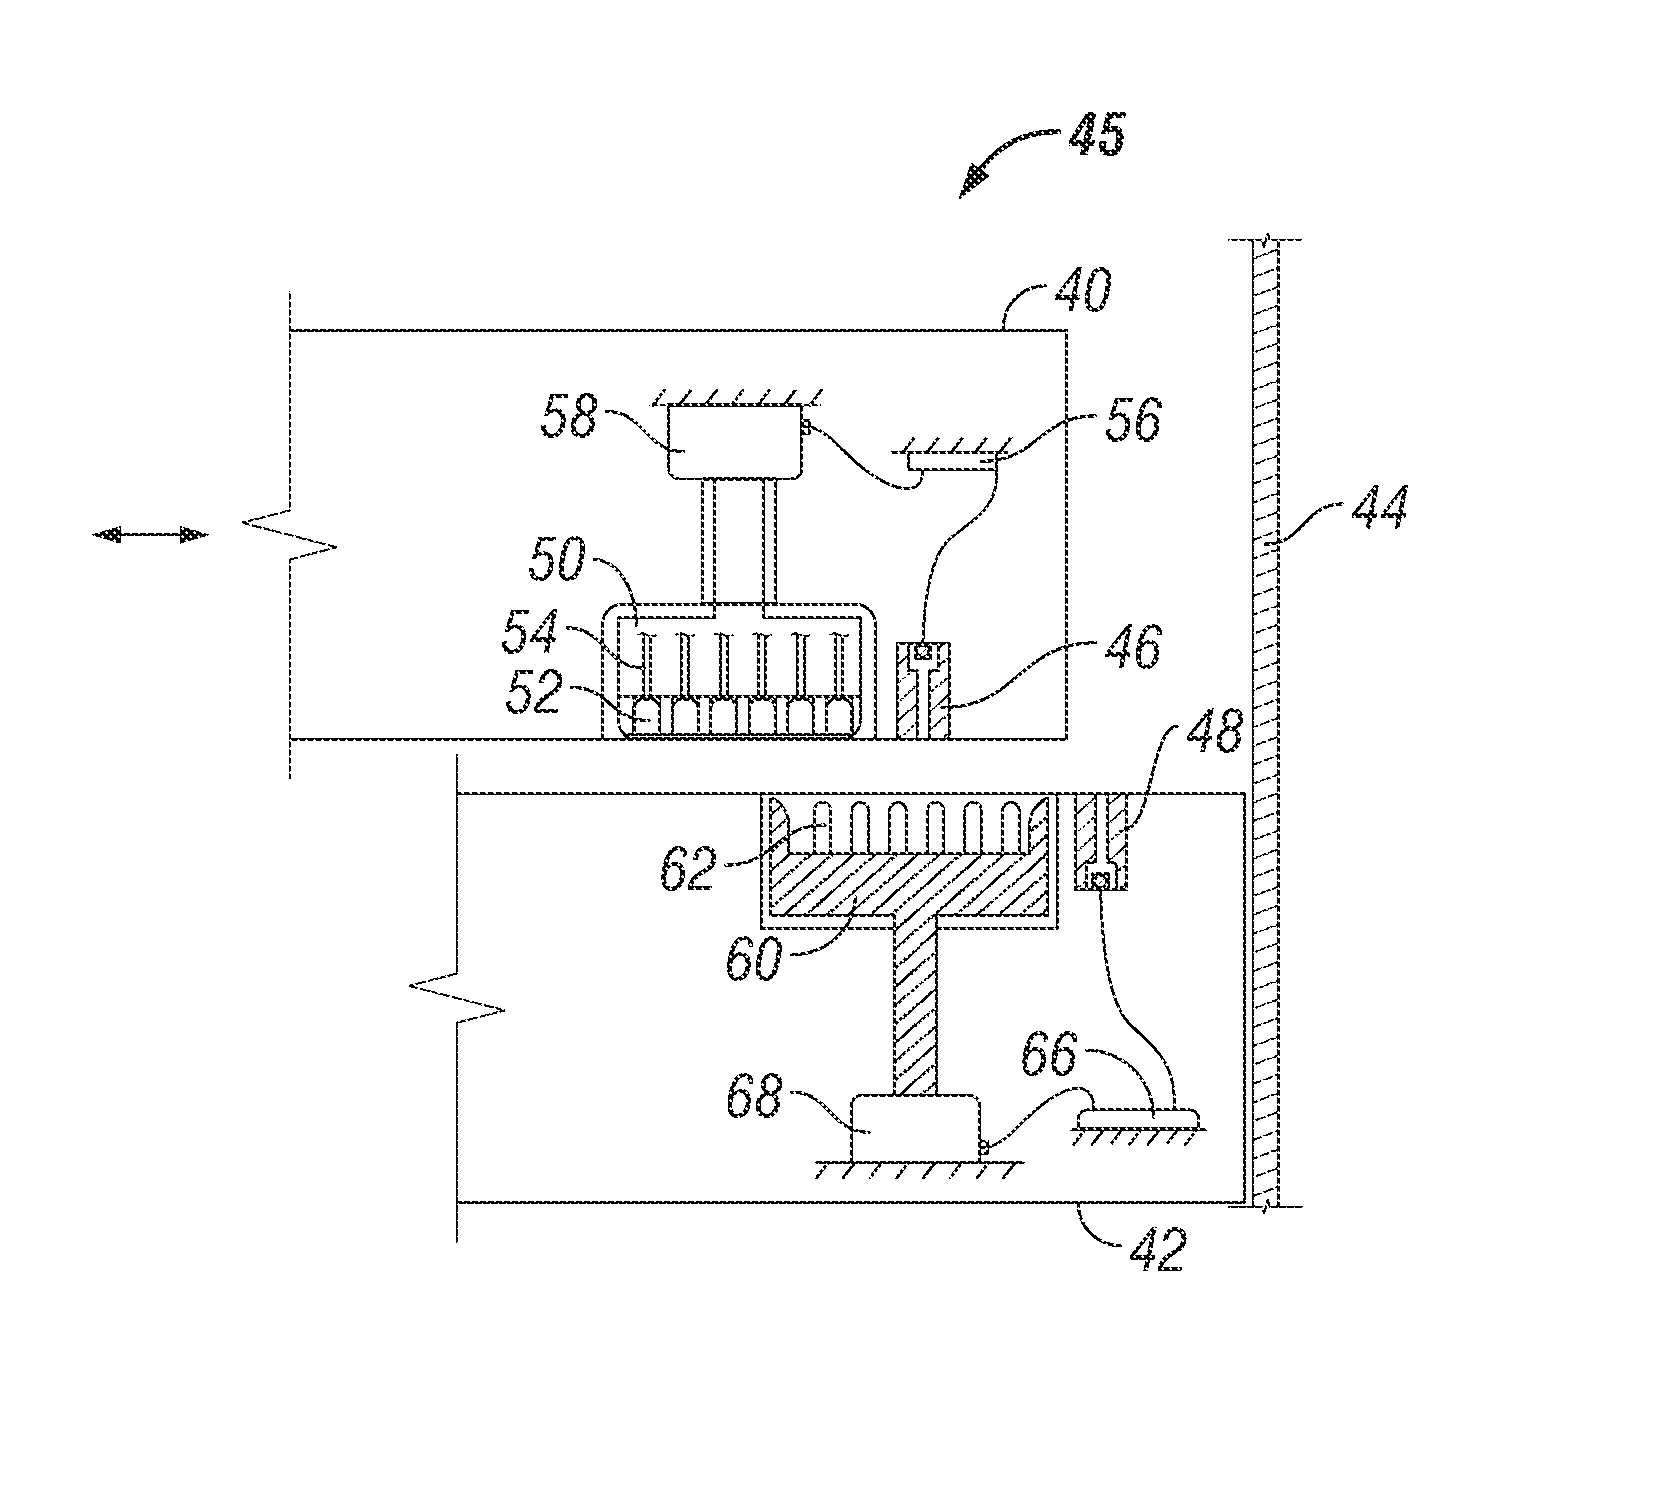 Connector for adjacent devices